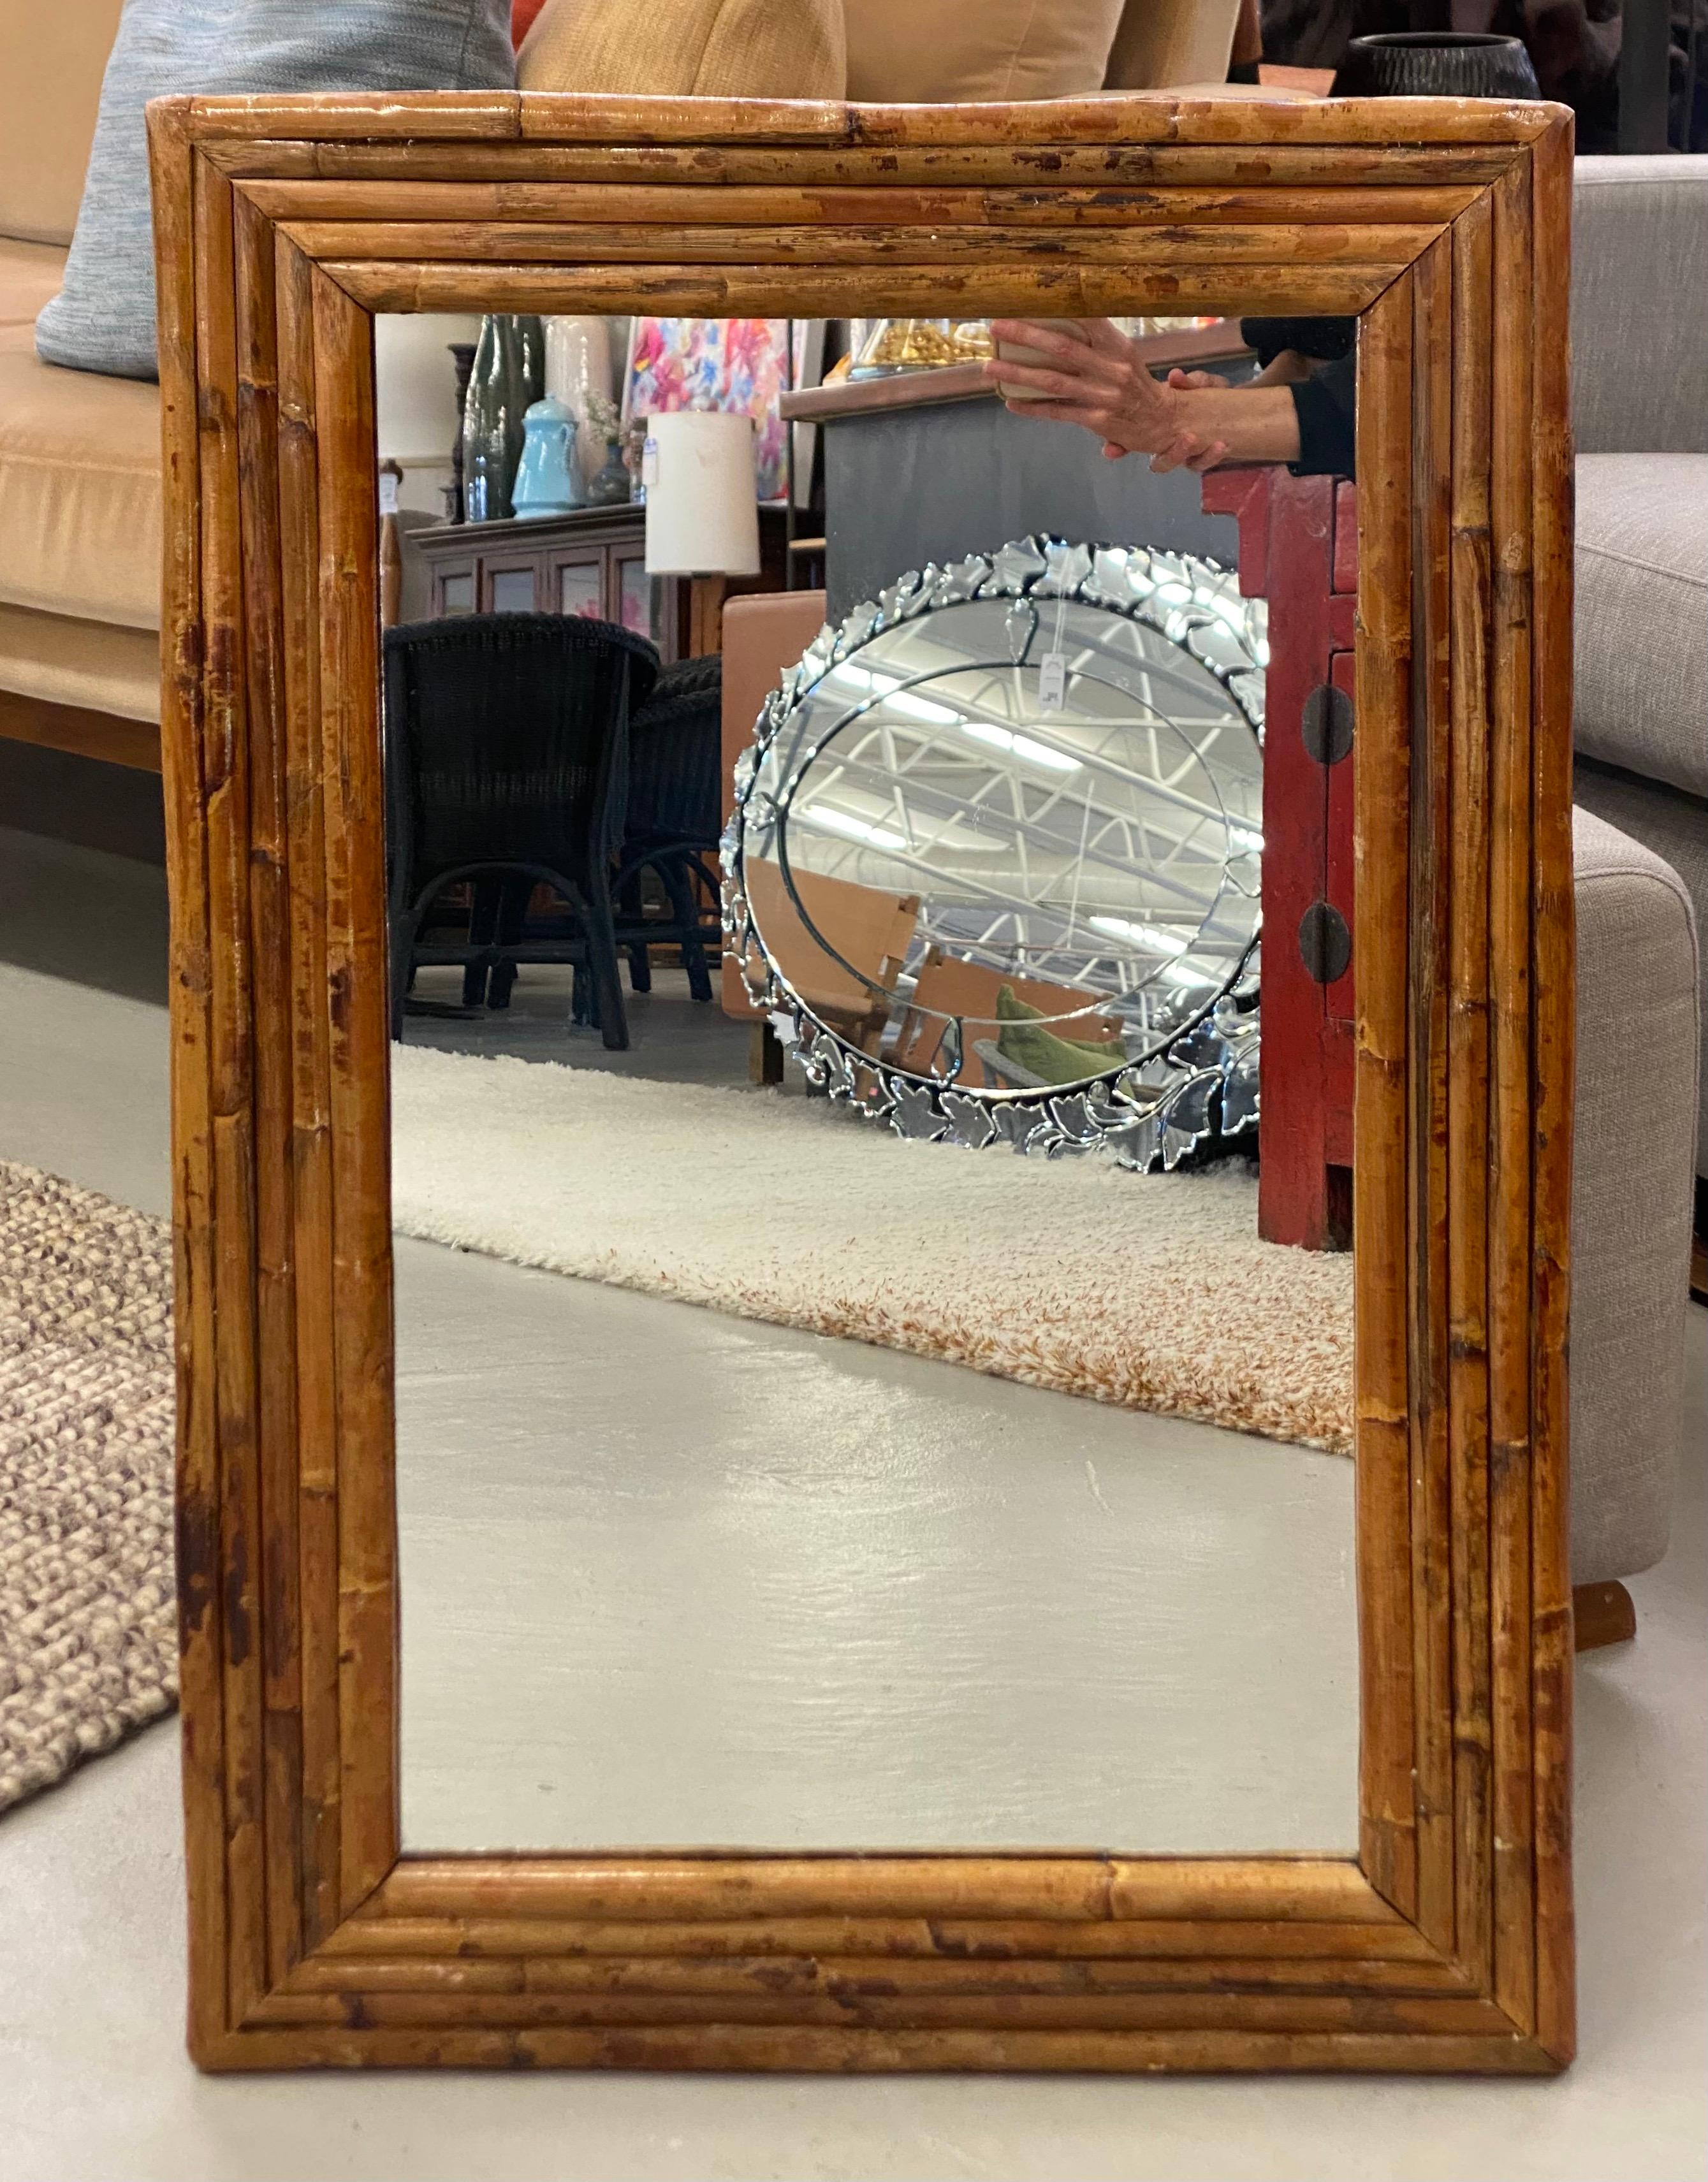 Bamboo framed mirror

Measures: 20.5 W x 29.5